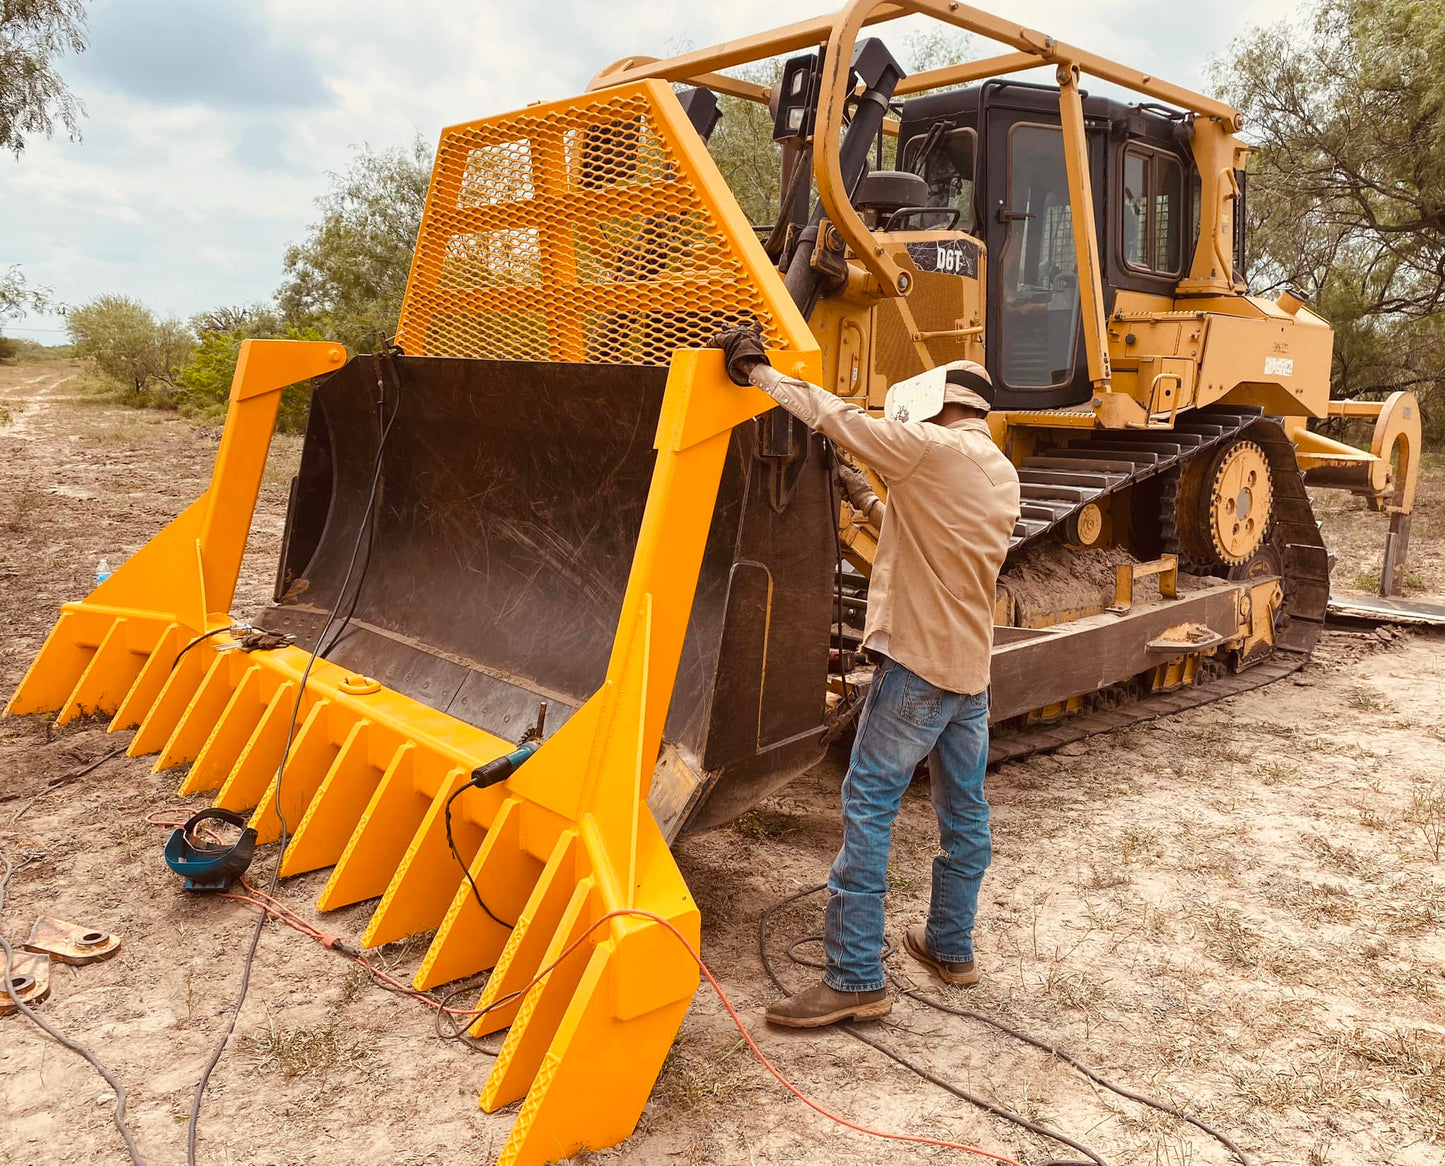 HEBBRONVILLE MACHINE SHOP 8’ TO 24’ PIN ON EXTRA HEAVY DUTY STACKING RAKE FOR SKID STEER